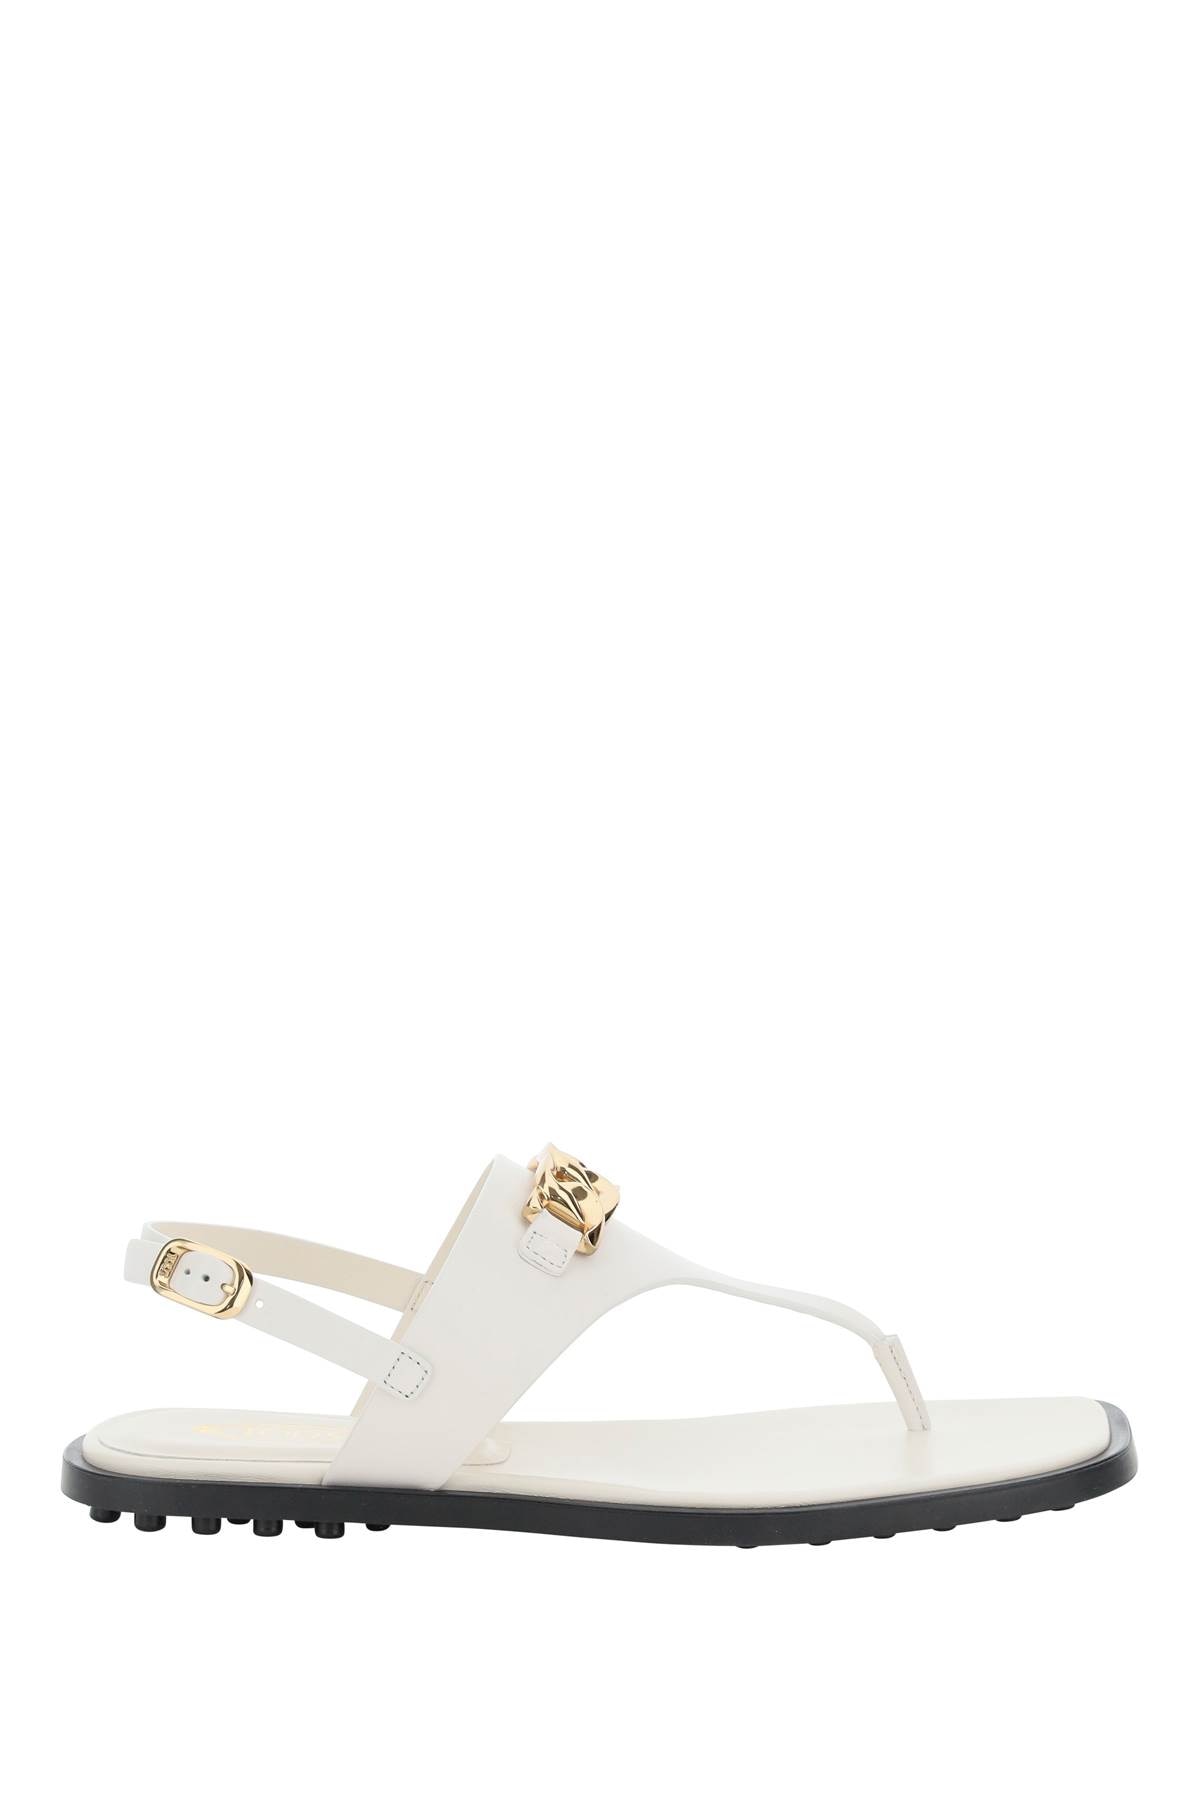 TOD'S LEATHER THONG SANDALS 38 White Leather